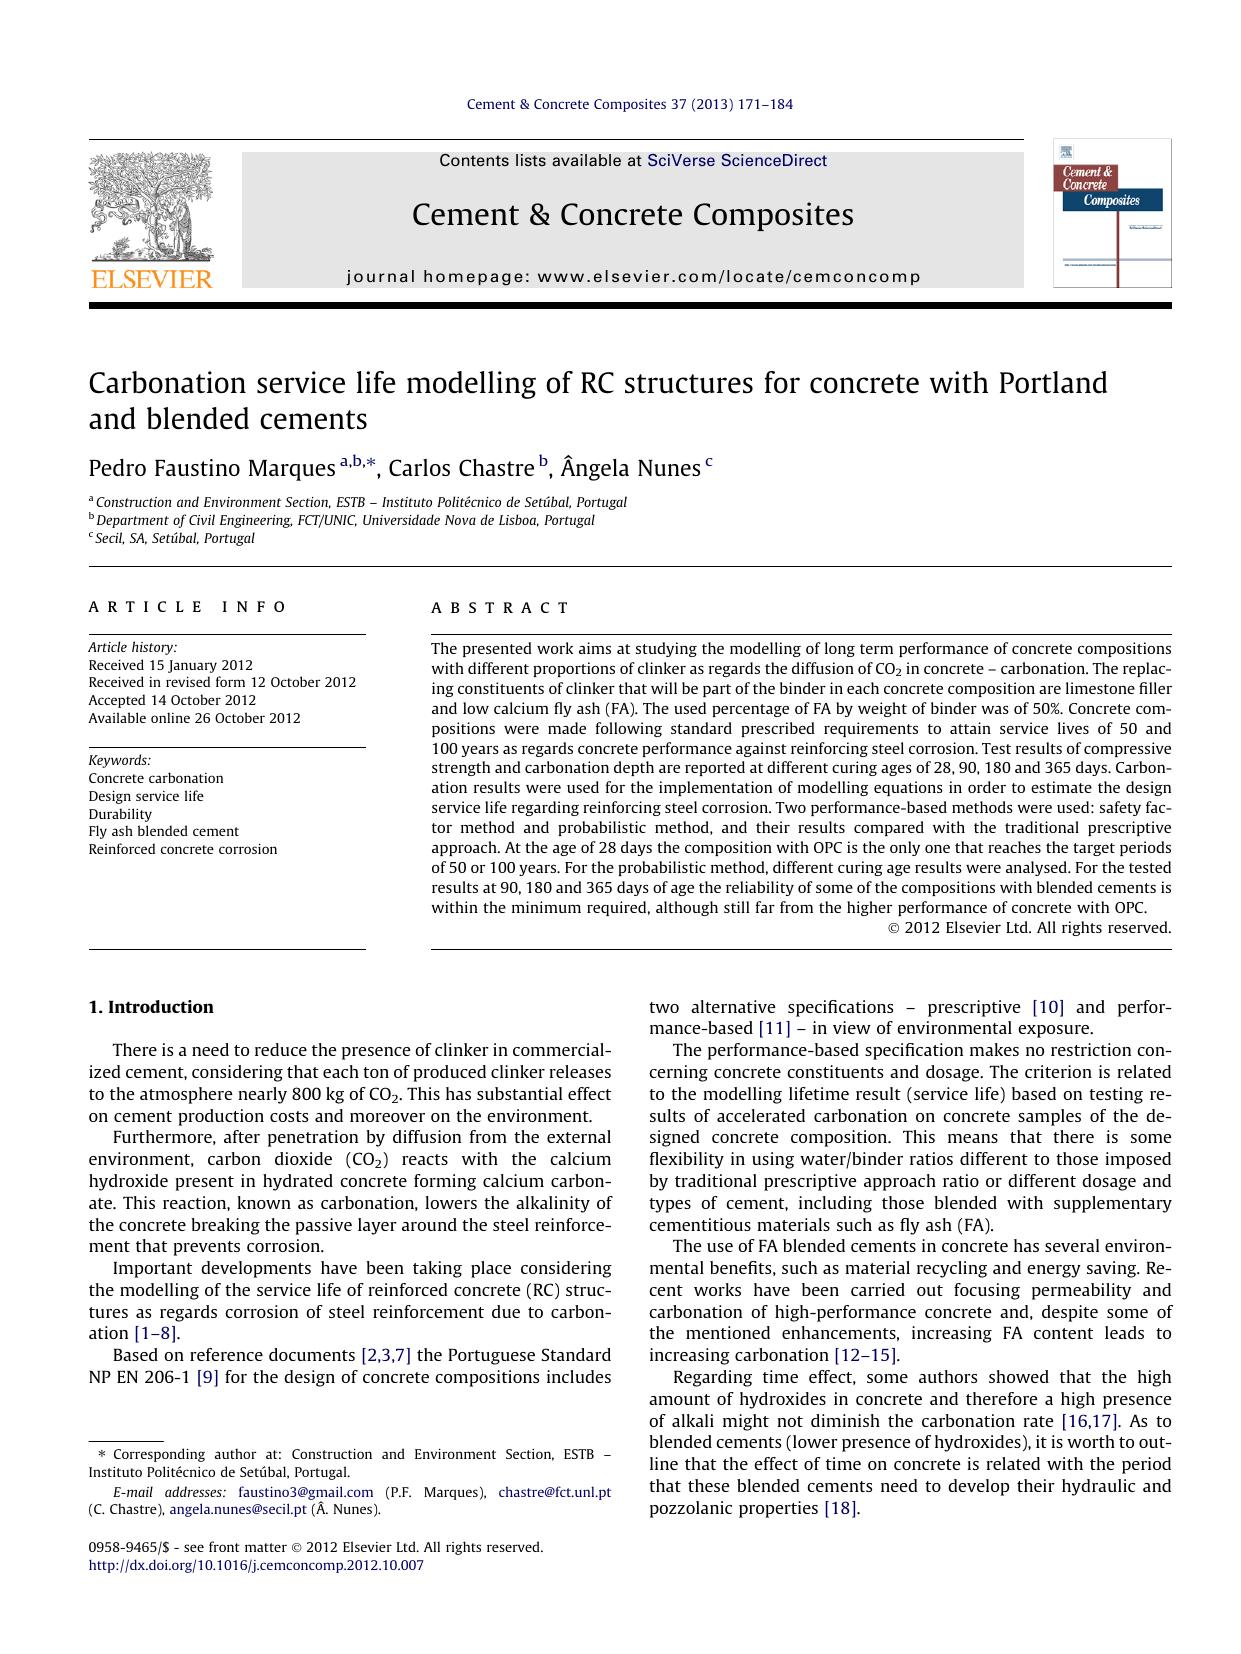 Carbonation service life modelling of RC structures for concrete with Portland and blended cements by Pedro Faustino Marques & Carlos Chastre & Ângela Nunes